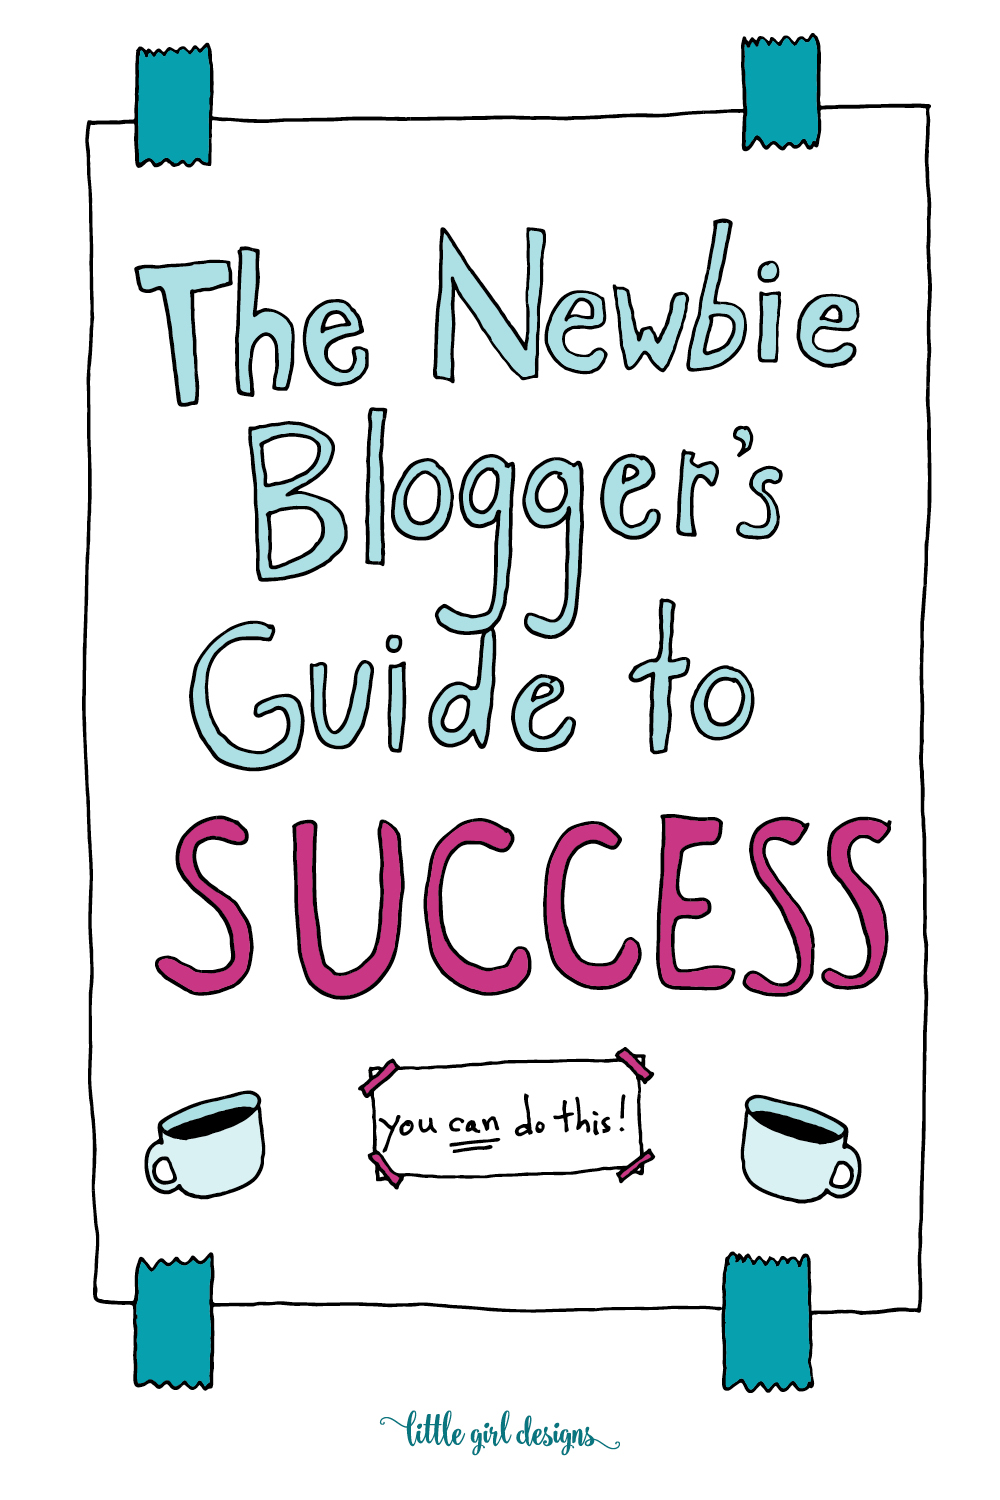 The Newbie Blogger’s Guide to Success